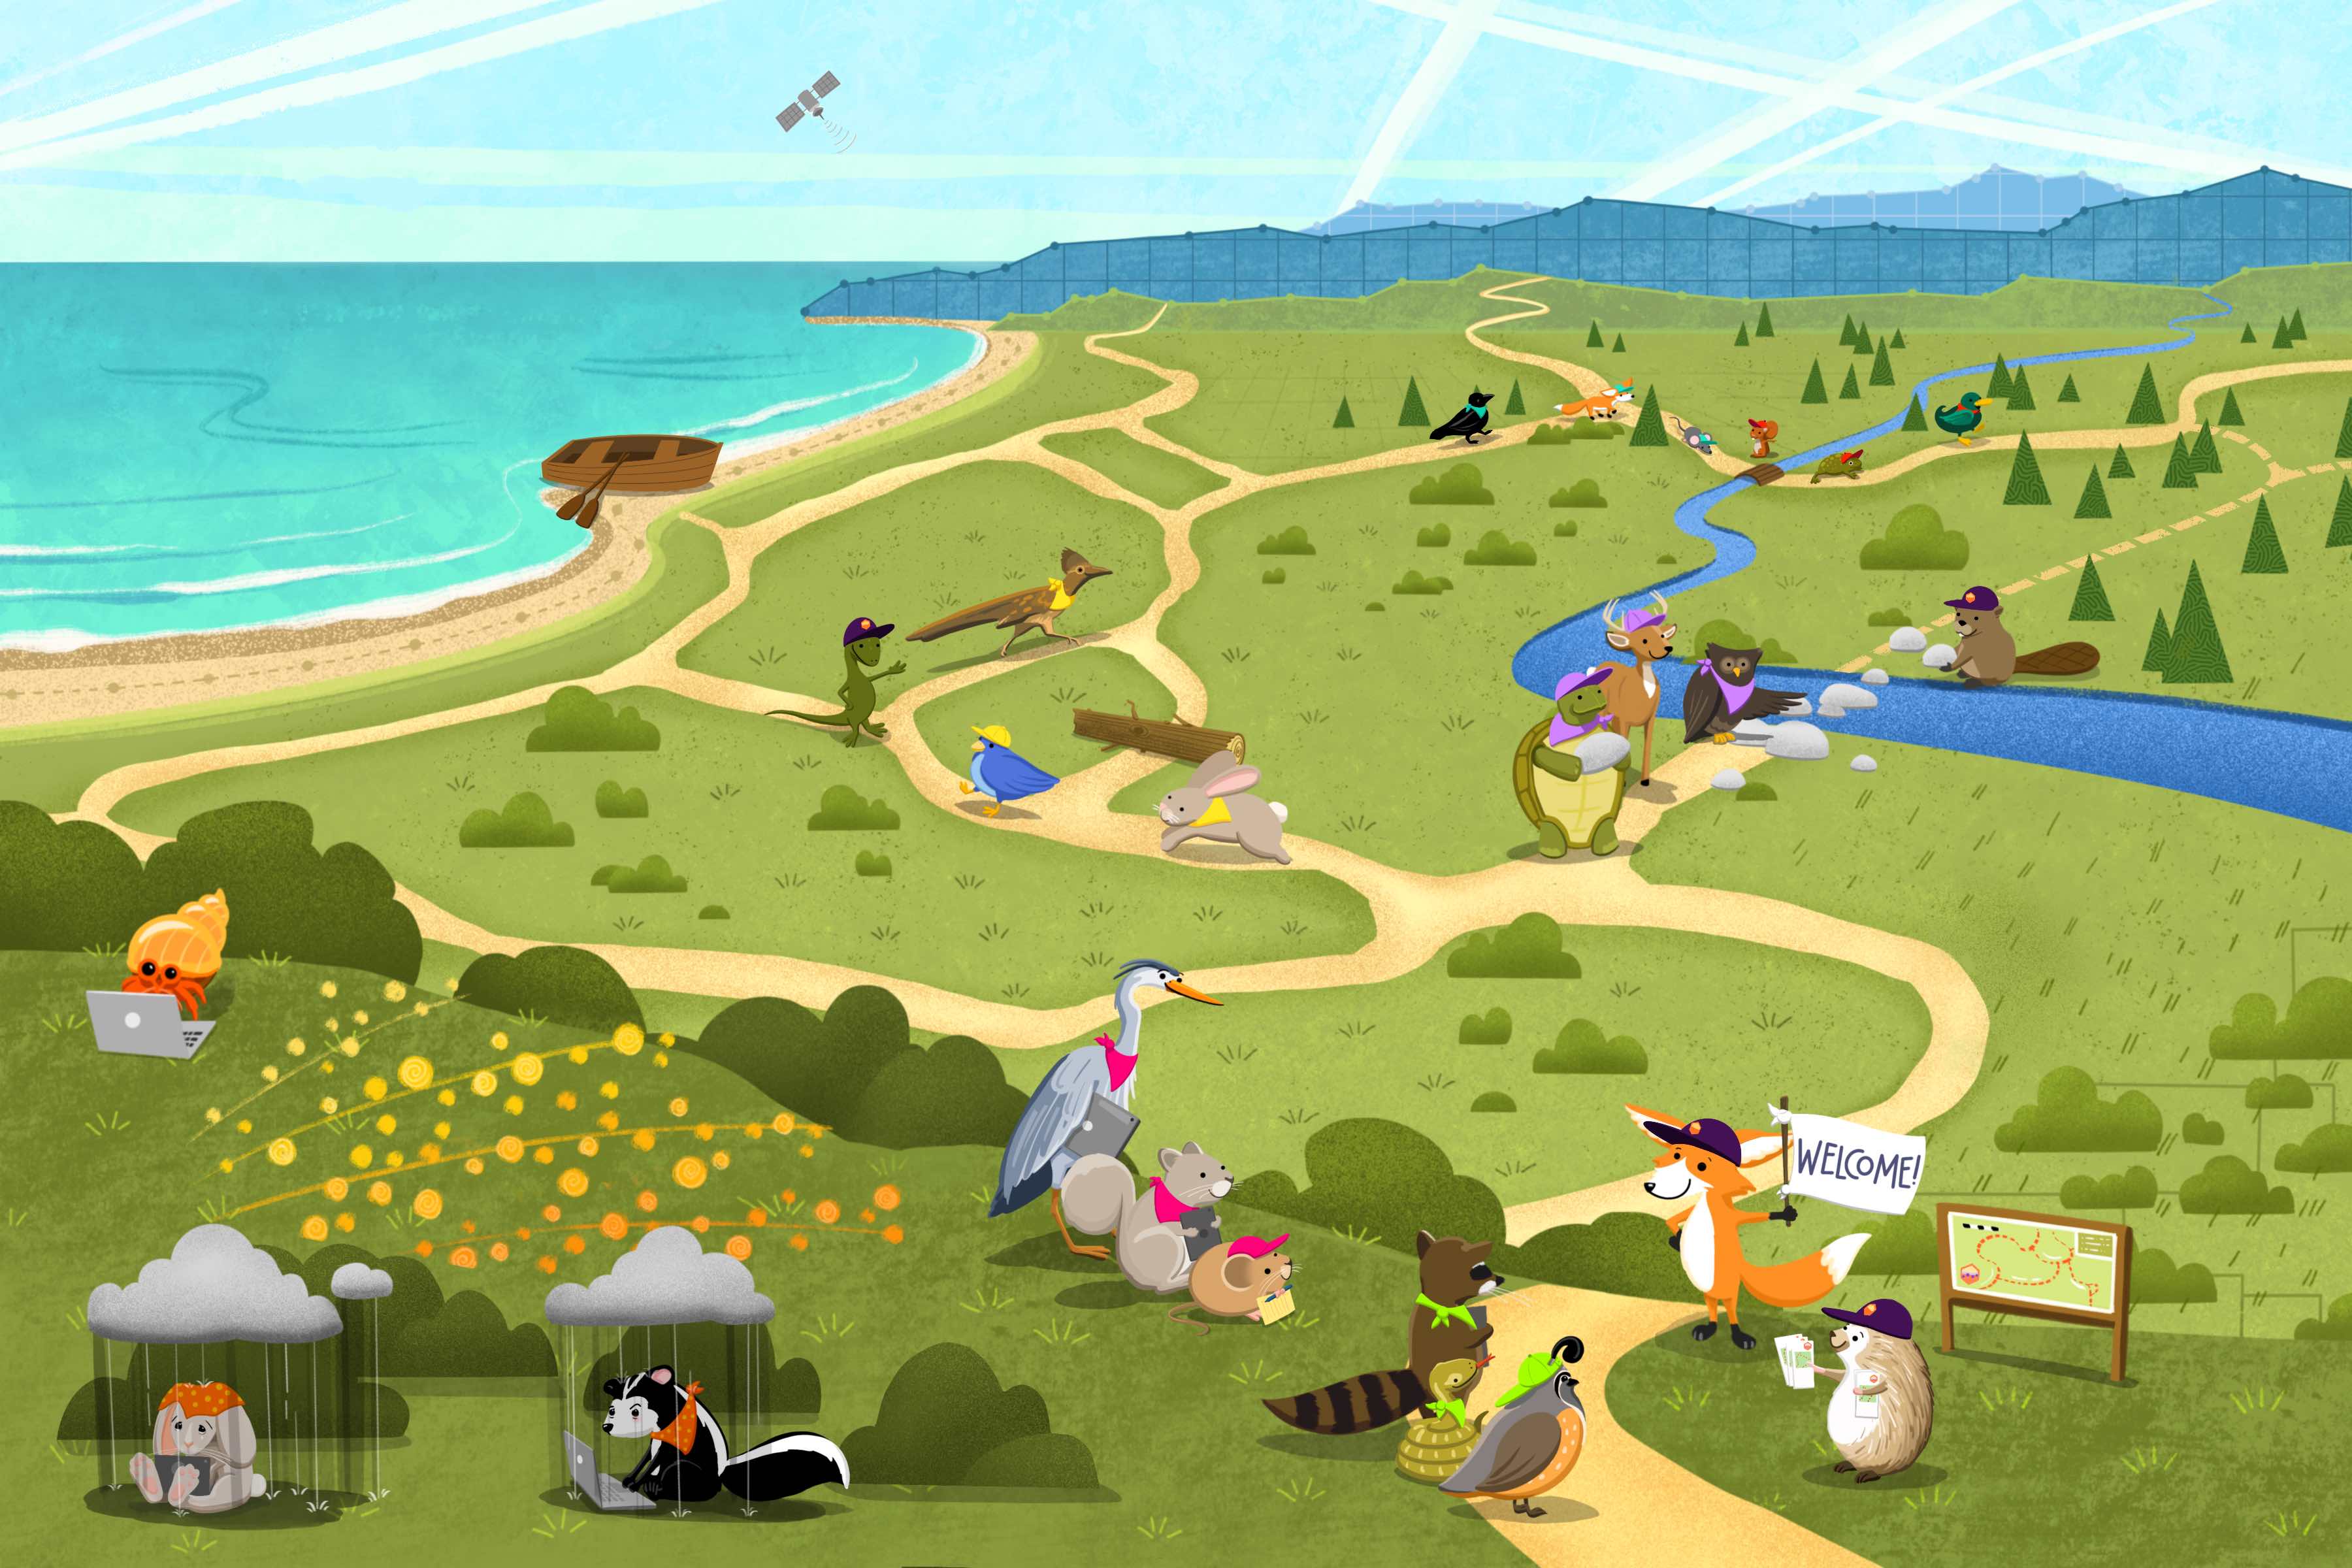 A landscape consisting of a grassy meadow next to a sandy beach and ocean, a winding river, and distant mountains. In the foreground, a sad bunny and skunk are working alone on their laptops, each with a rain cloud over their heads. Nearby is a trailhead with a fox holding a 'Welcome!' sign for a variety of different critters to see. Past the trailhead are branching pathways through the Openscapes landscape. No matter the path, however, there are small groups of animals working together to find their way. Nods to data science are scattered throughout the image, including mountains made of data points and a satellite in the sky.